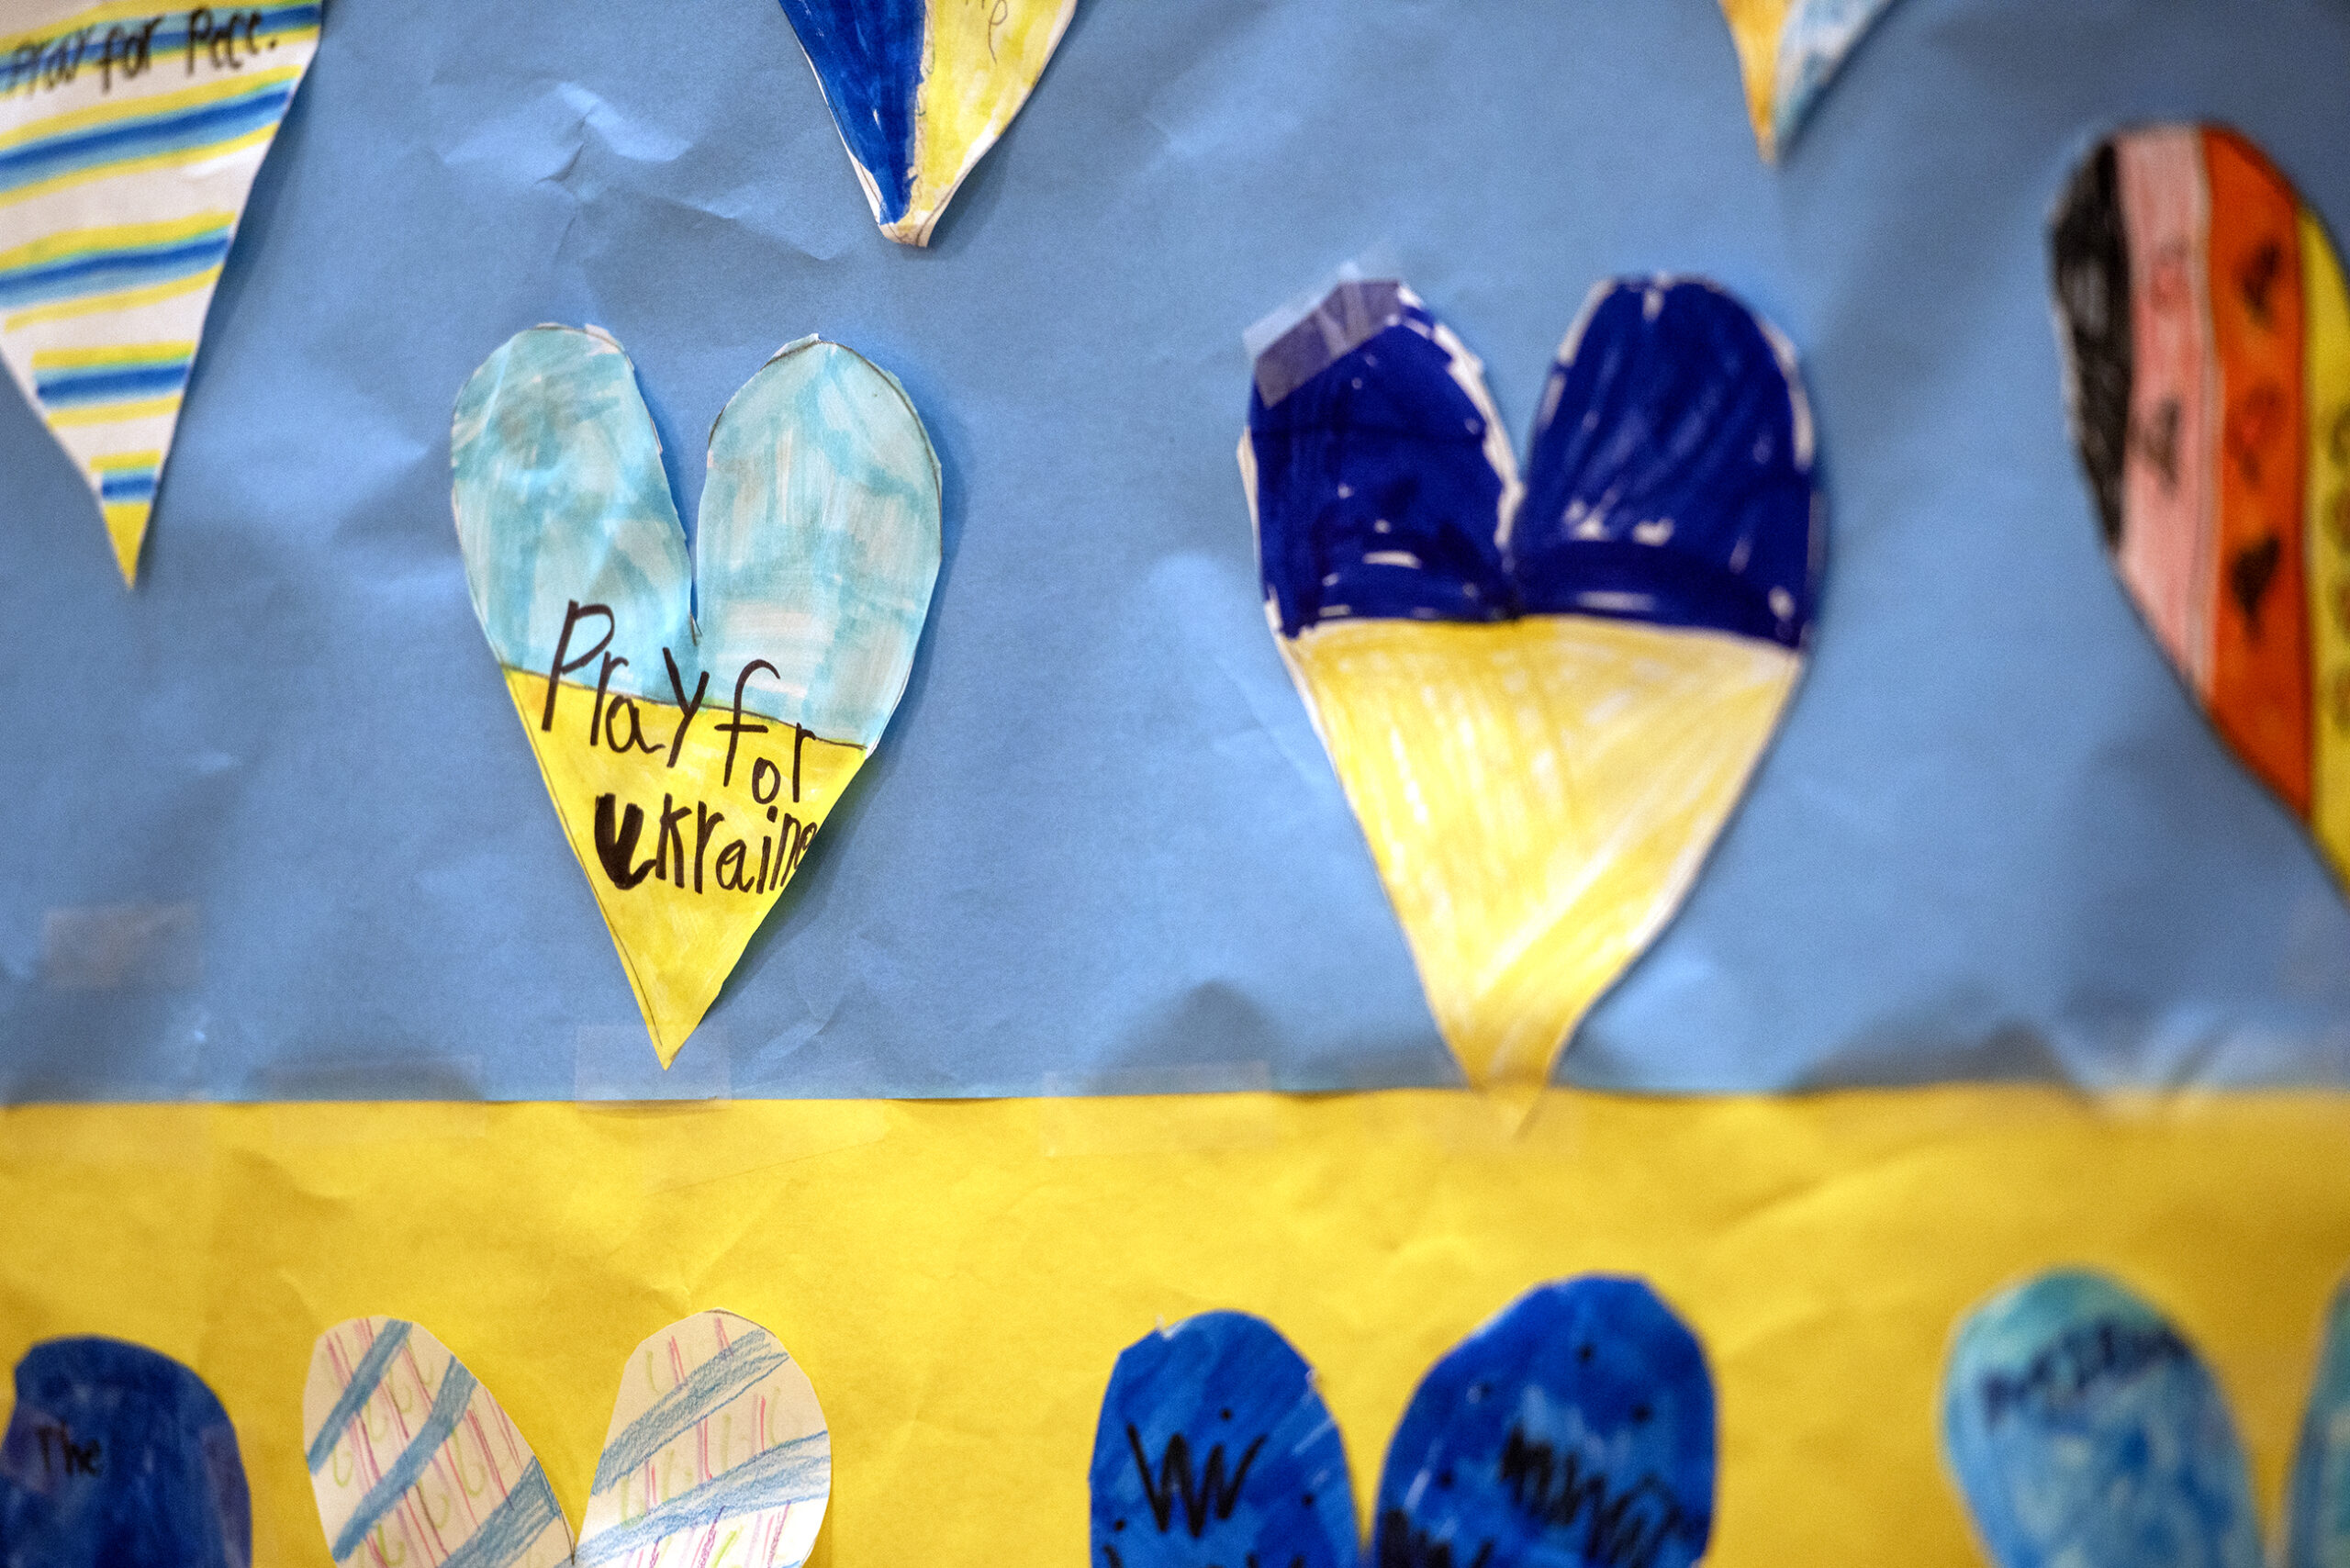 A paper heart is colored in blue and yellow, saying "Pray for Ukraine."